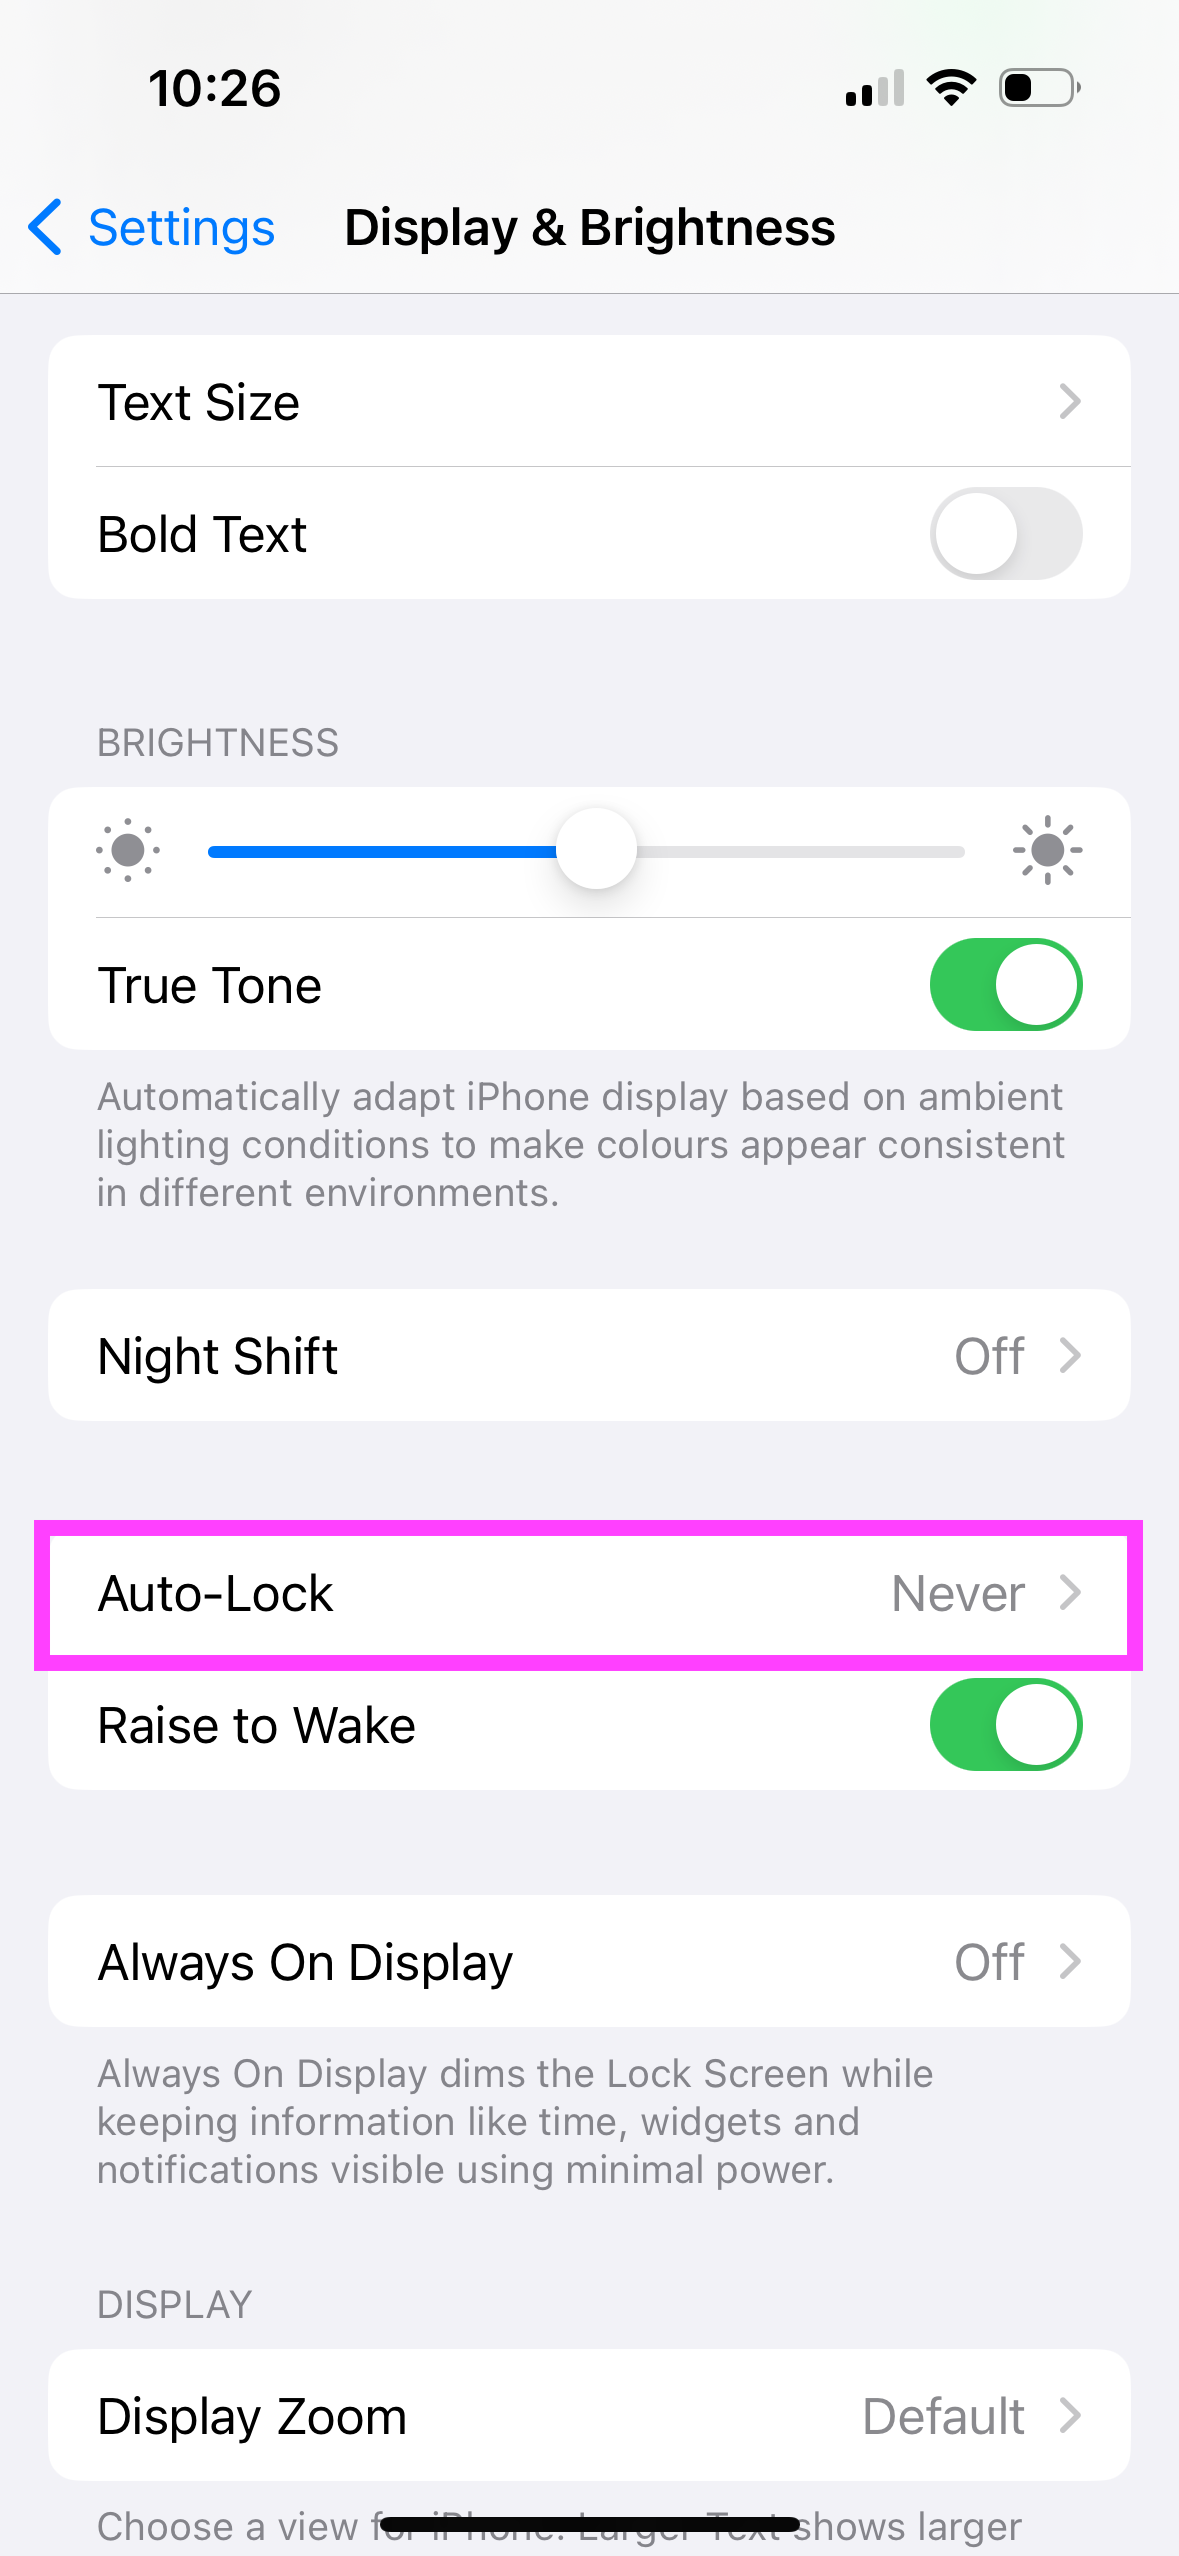 Settings menu on an iPhone highlighting 'Auto-Lock' set to 'Never' in the 'Display & Brightness' section, showcasing how to disable automatic screen lock. Suitable for articles about staying online while 'pretending to work.'